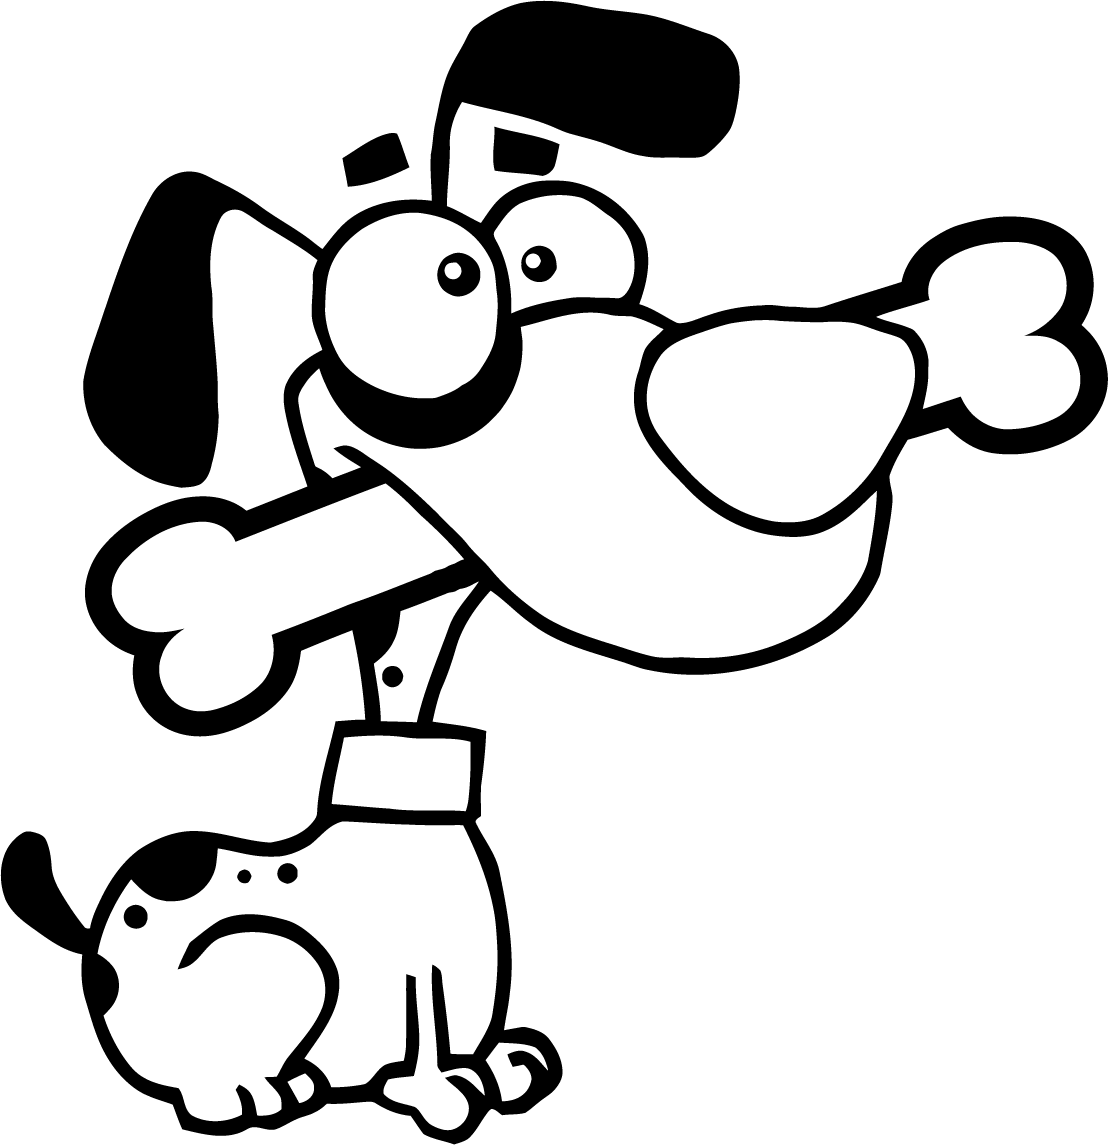 Dog with a bone clipart